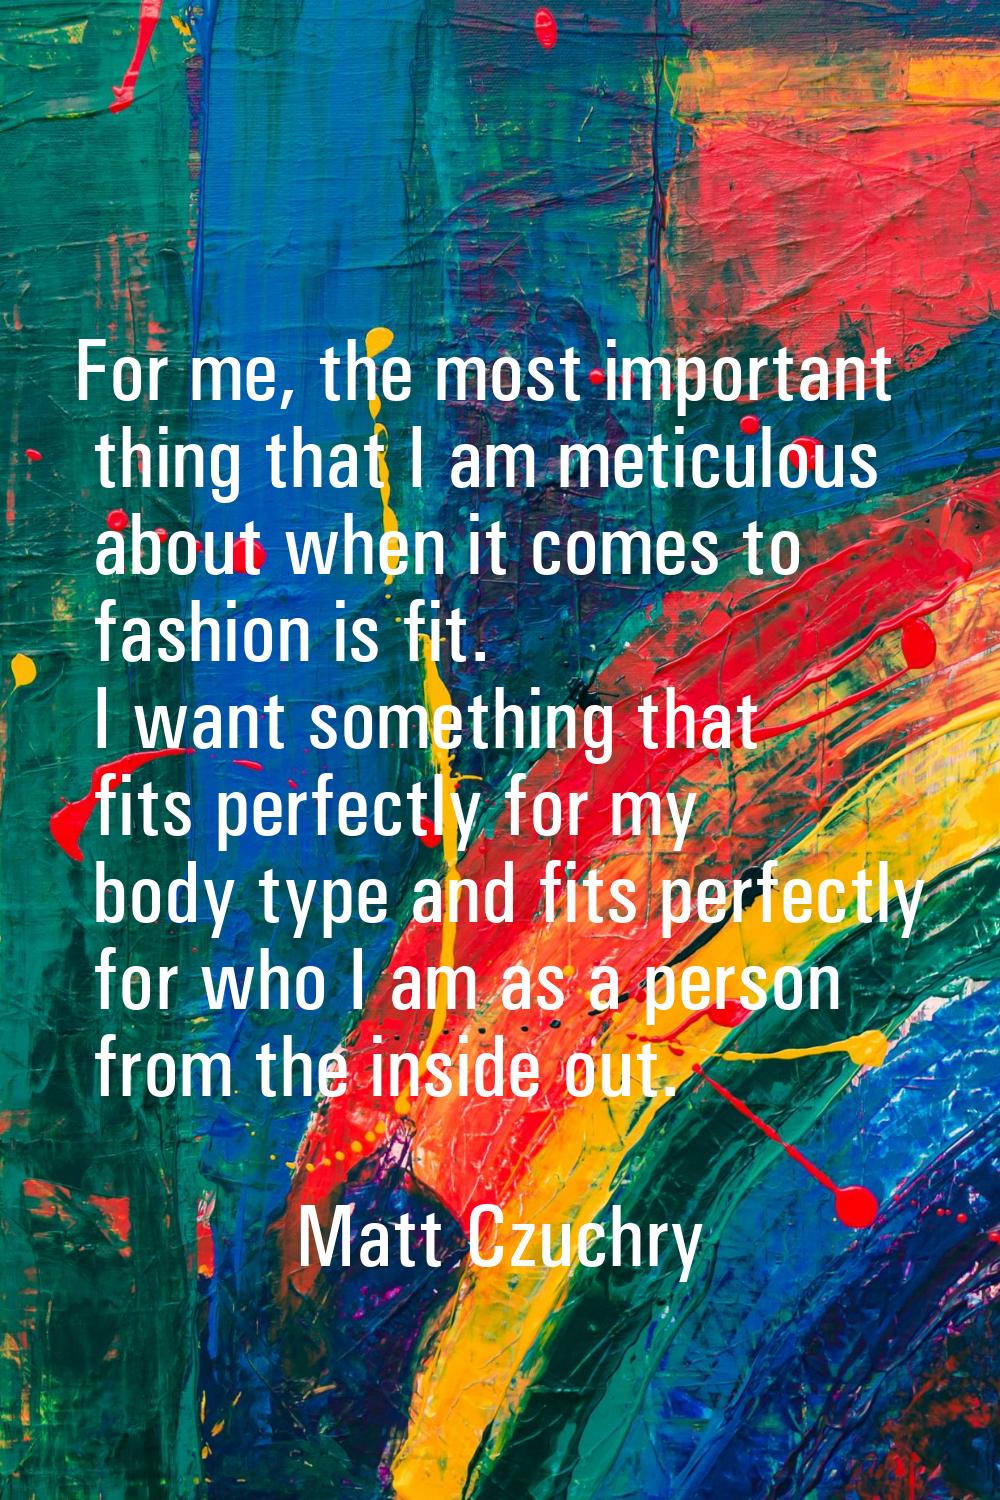 For me, the most important thing that I am meticulous about when it comes to fashion is fit. I want